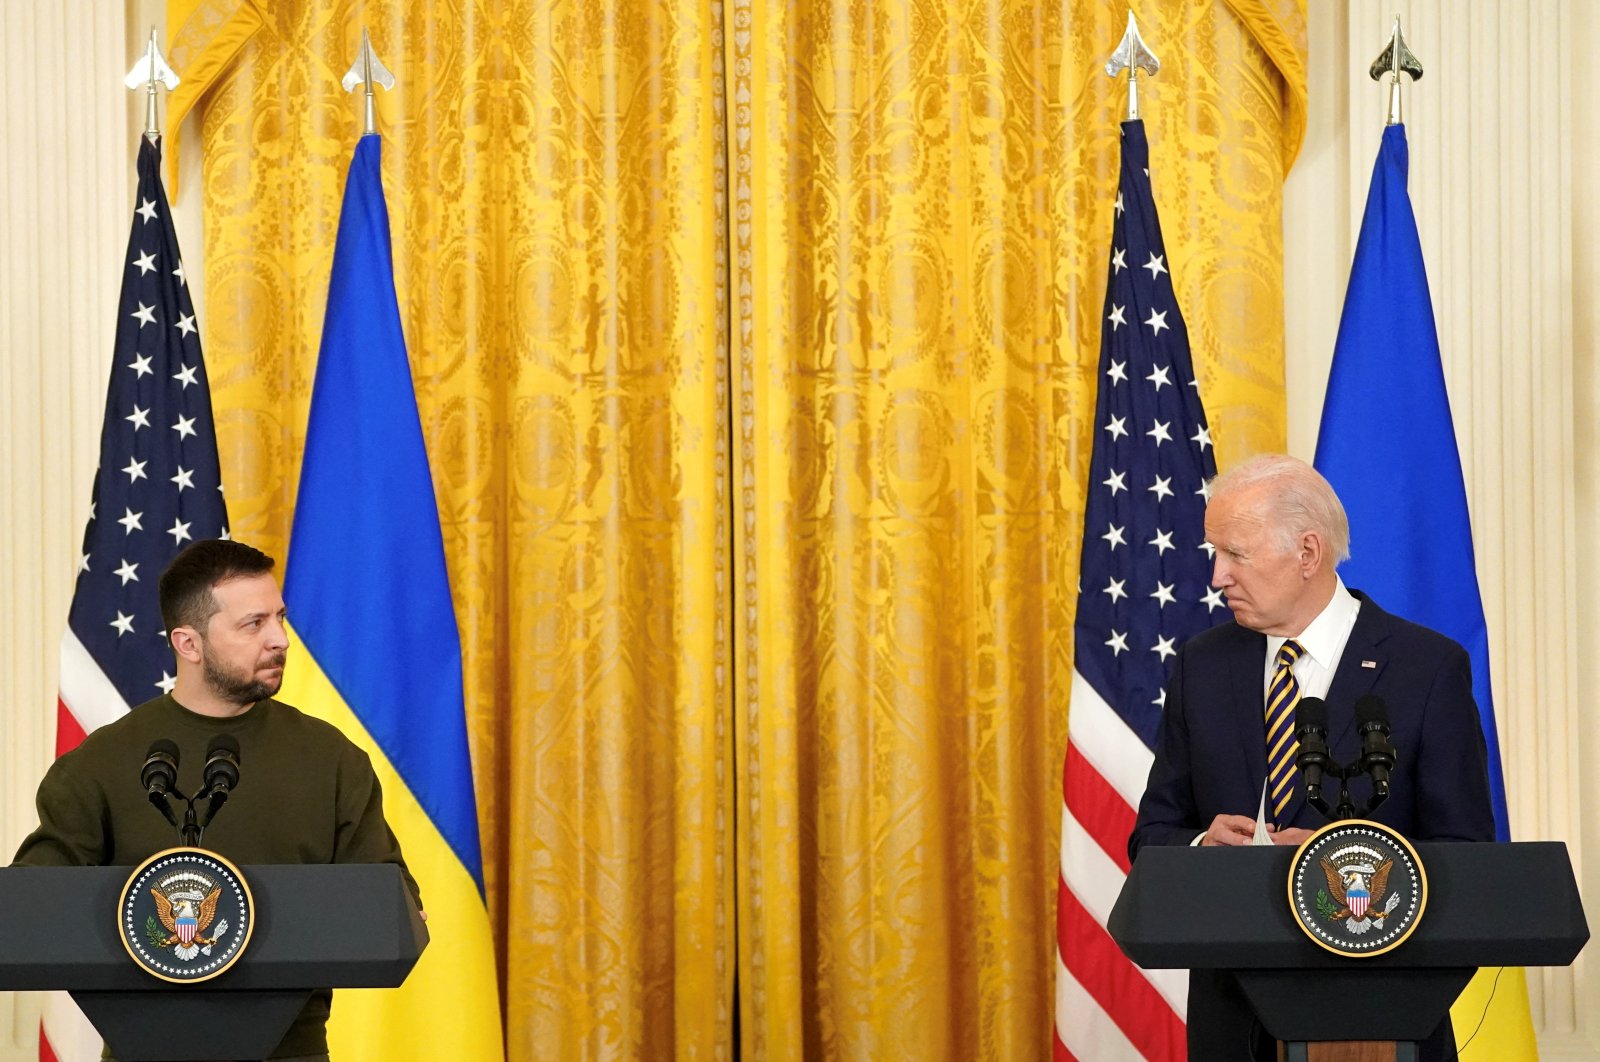 U.S. President Joe Biden and Ukraine&#039;s President Volodymyr Zelenskyy hold a joint news conference in the East Room of the White House in Washington, U.S., Dec. 21, 2022. (Reuters Photo)